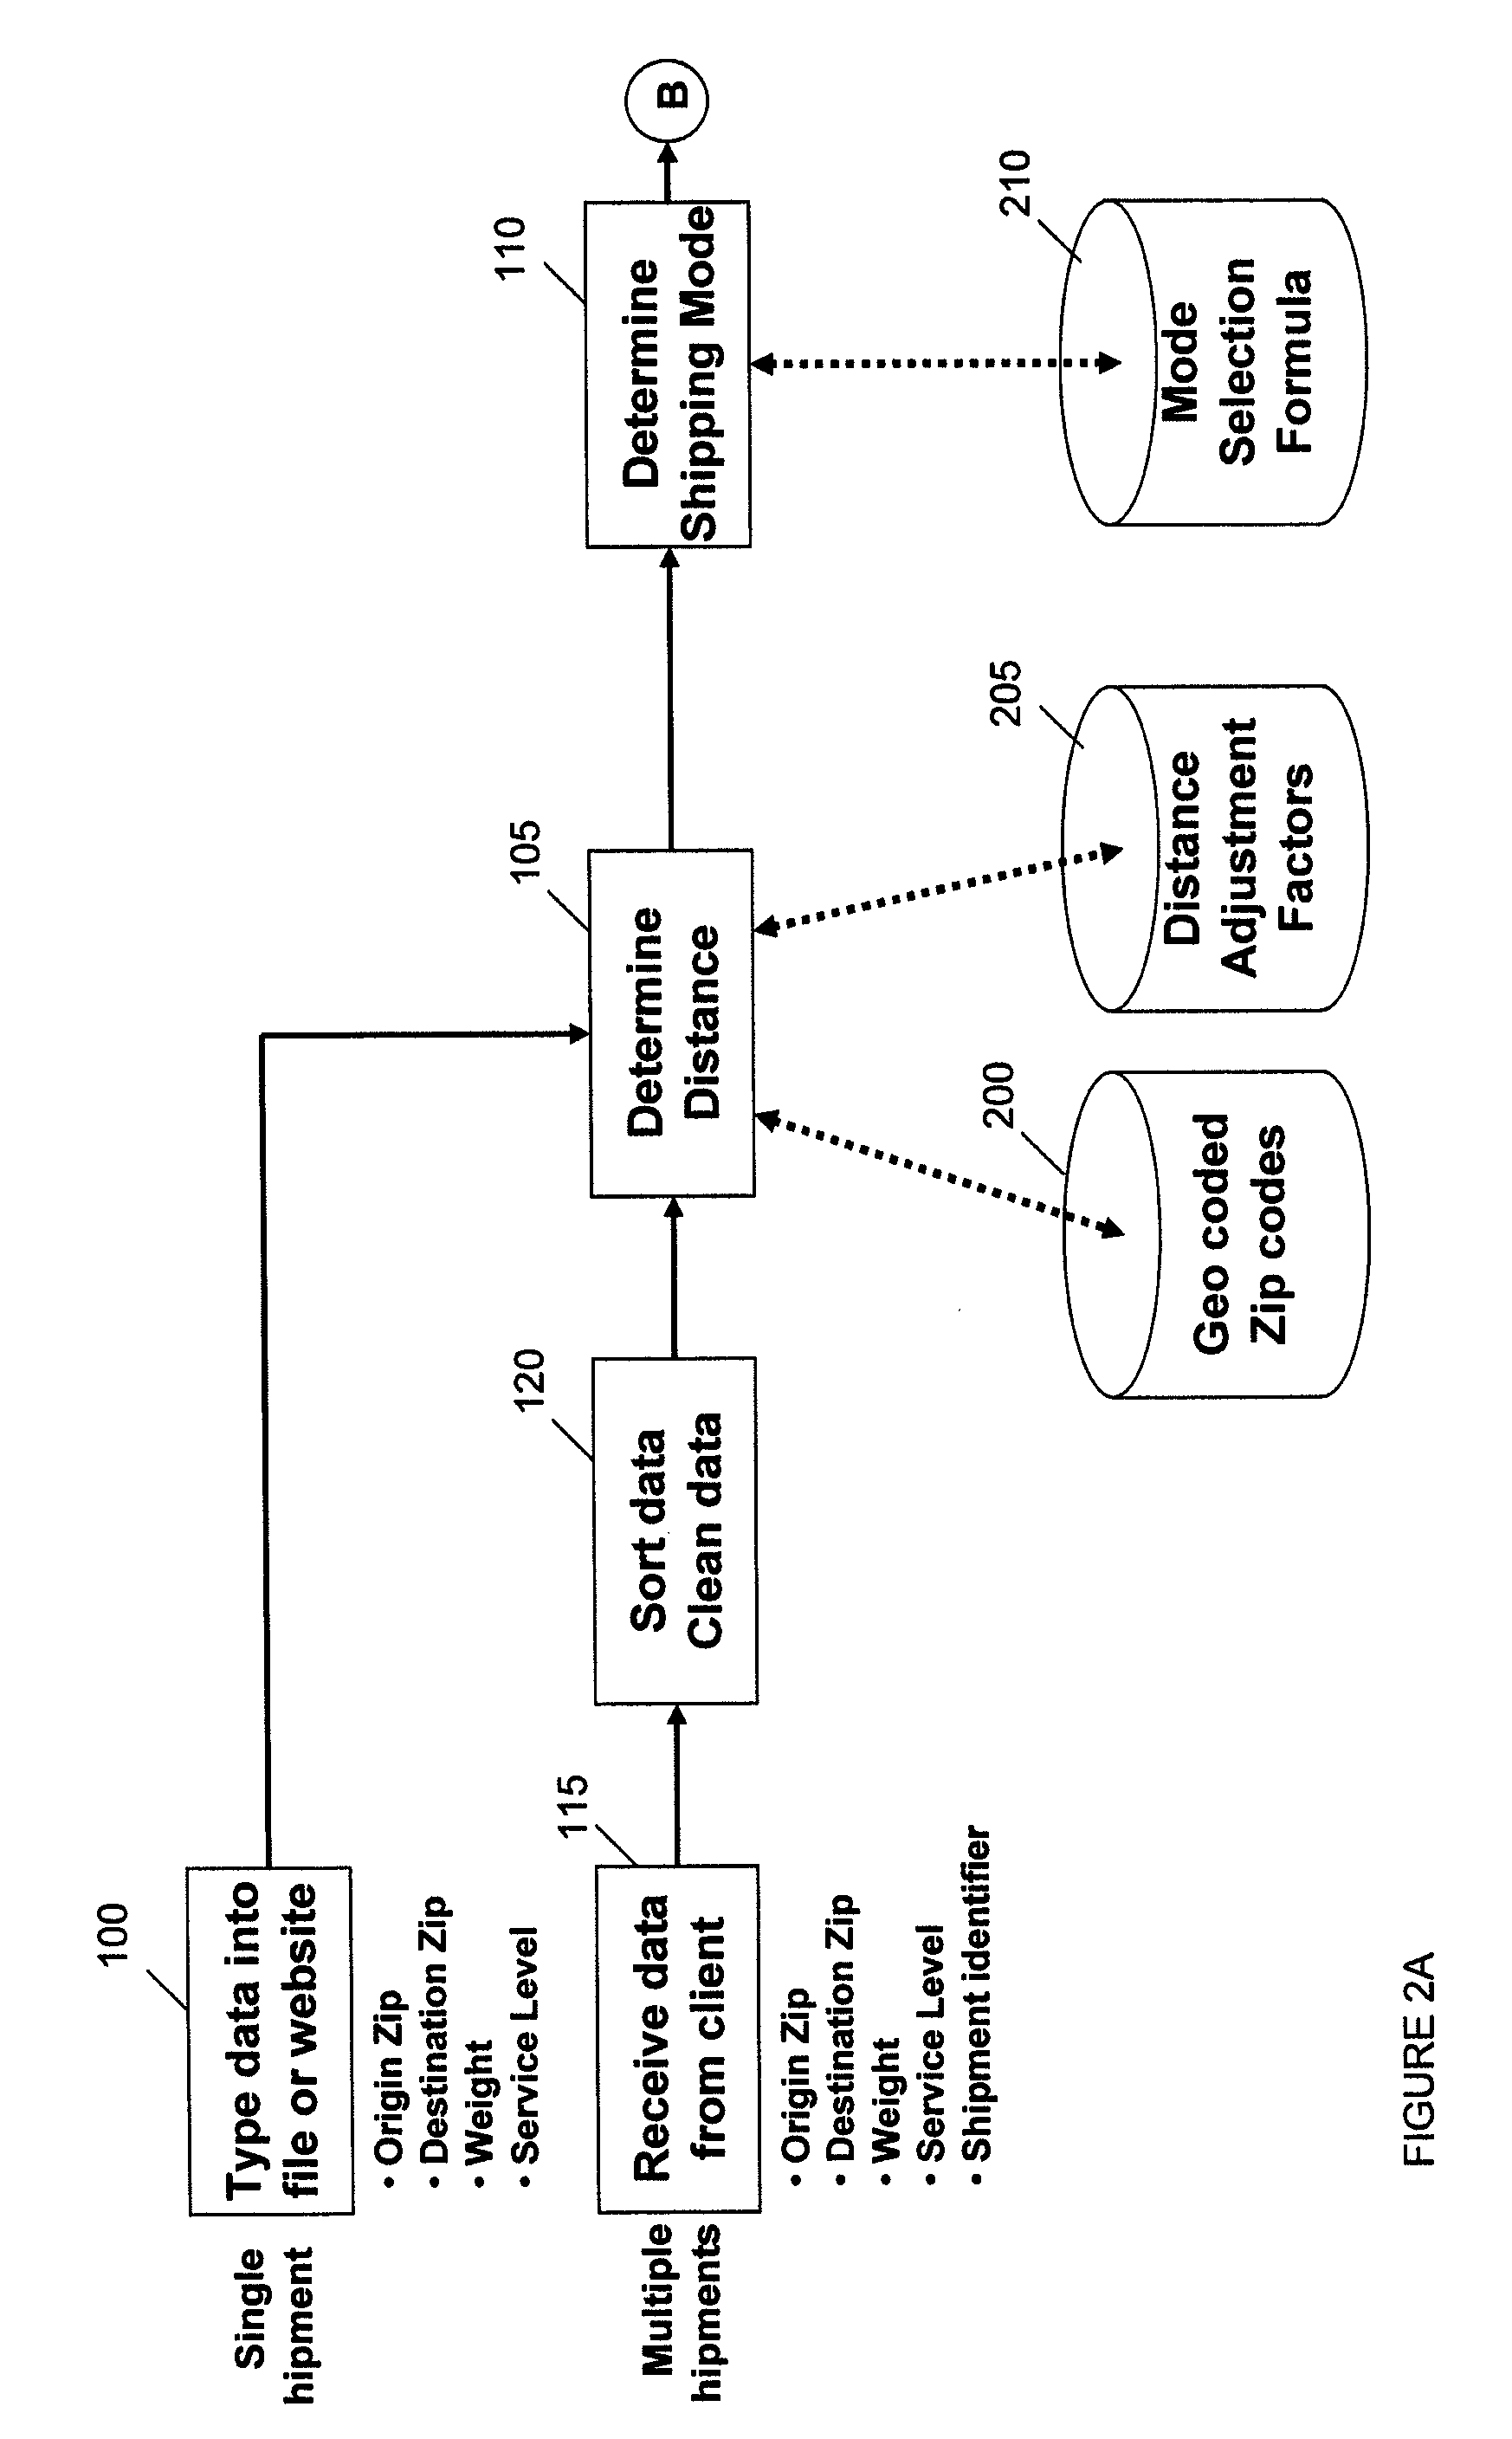 System and method for a carbon calculator including carbon offsets